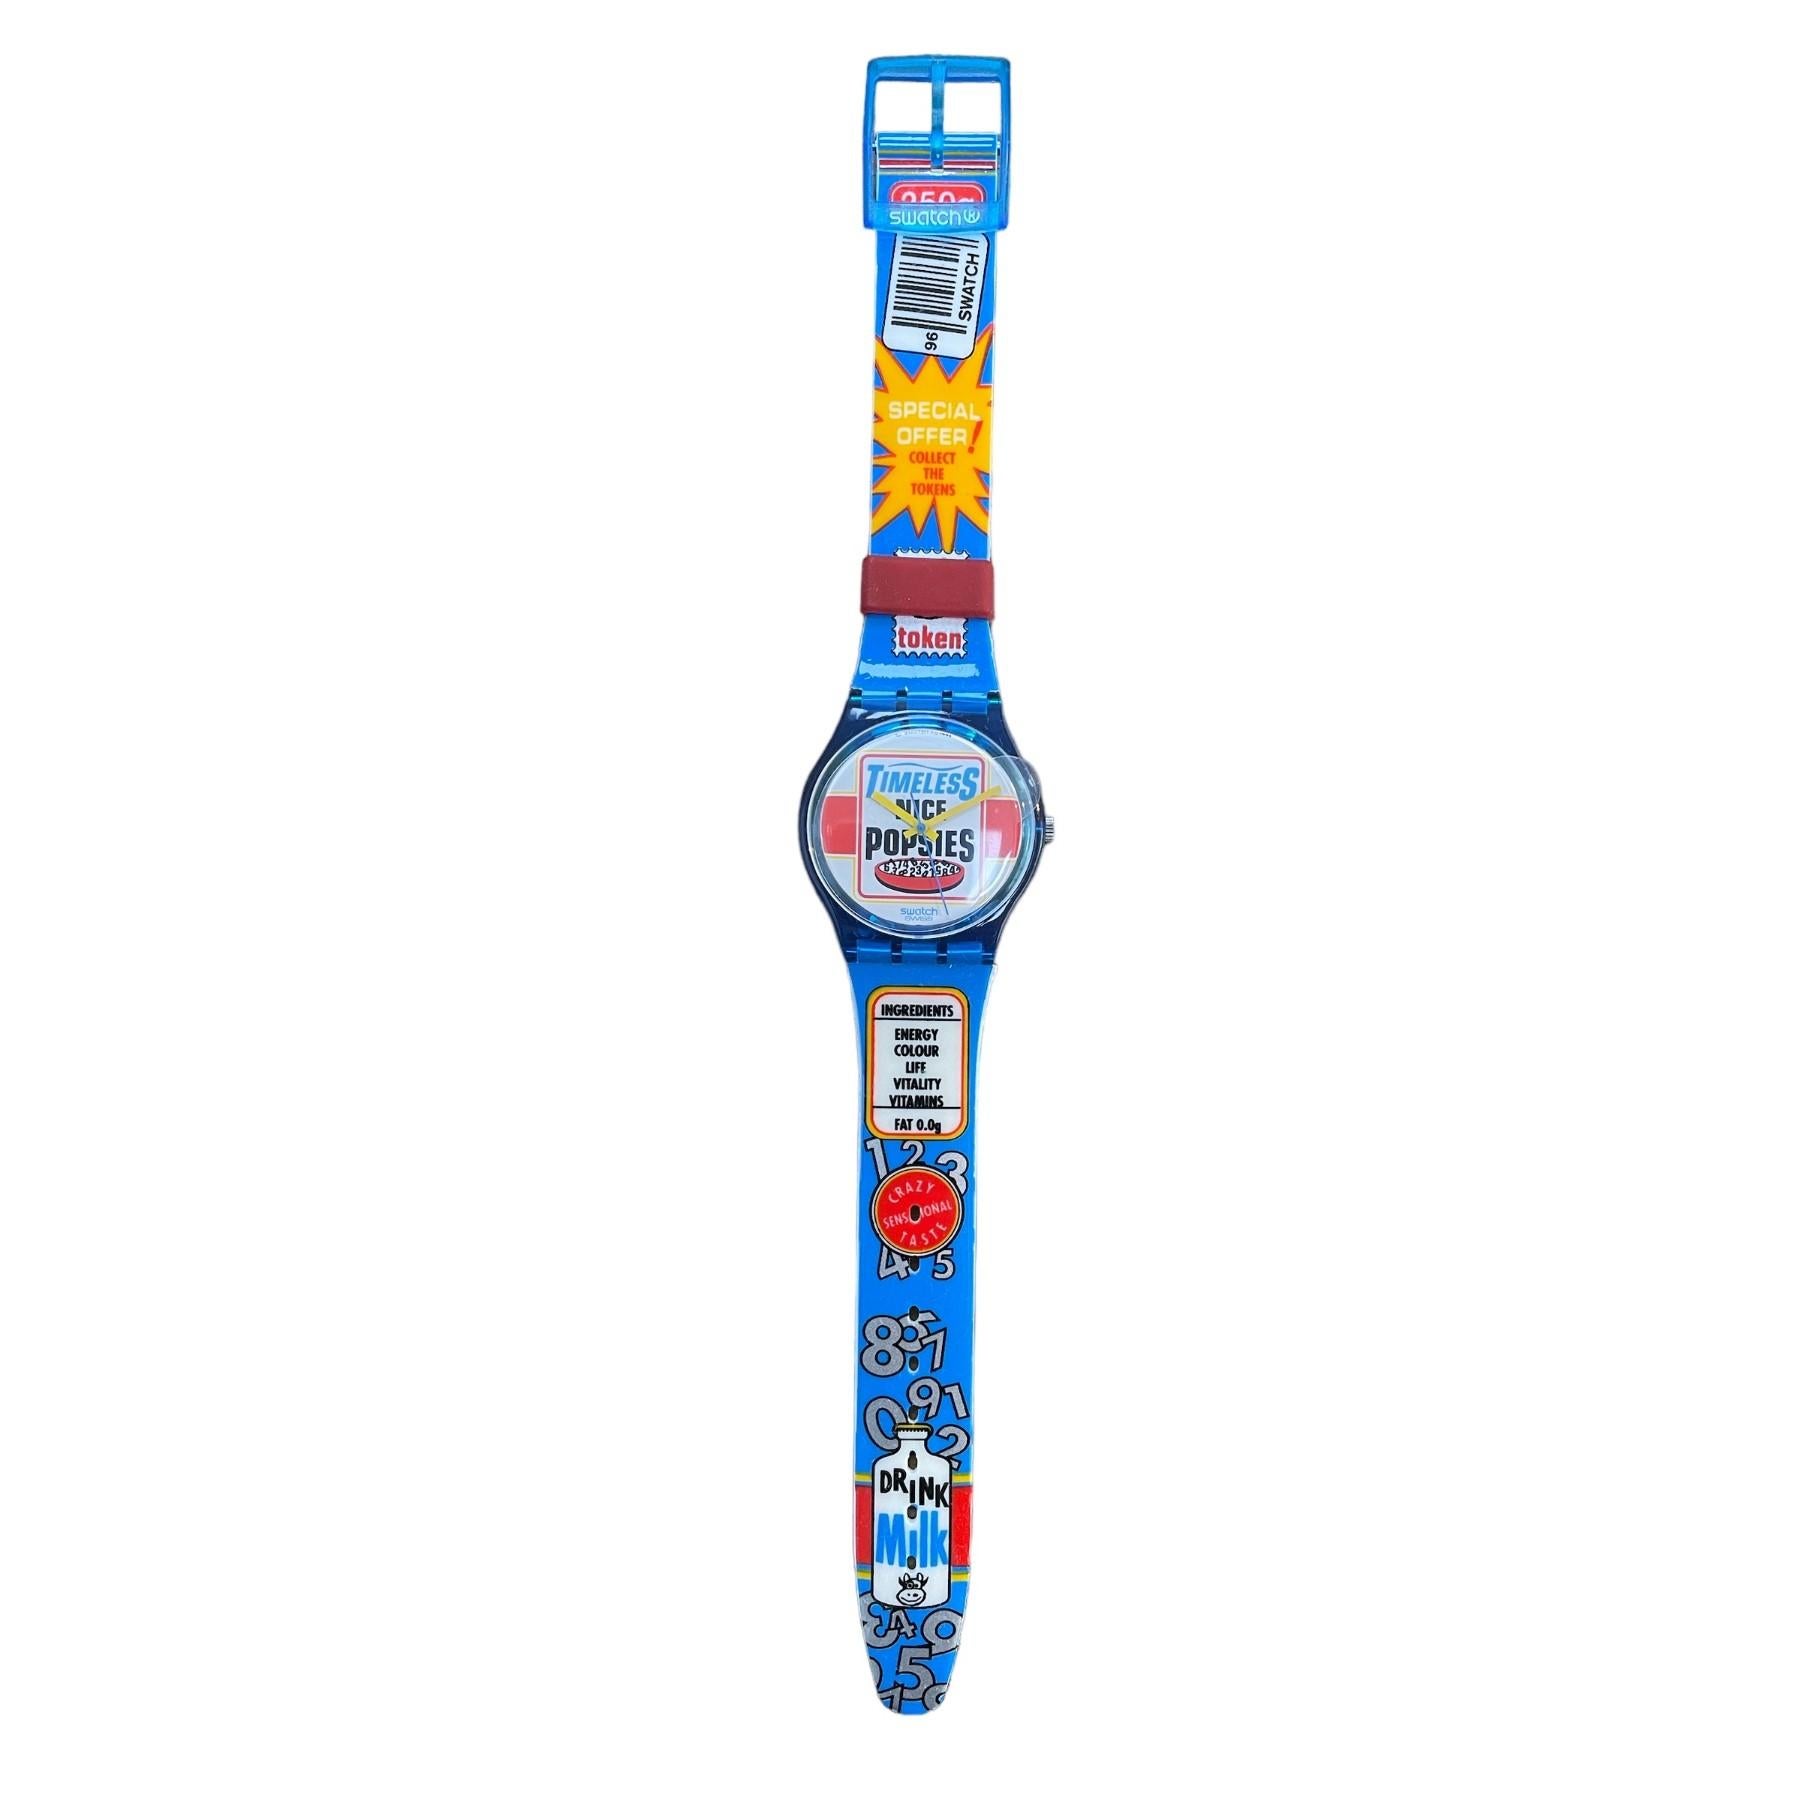 Transport yourself to 1996 with this Swatch GOOD MORNING watch in very good condition. Perfect for collectors or as a nostalgic gift, though the bracelet may not be suitable for regular wear due to its age. Please note that as a vintage item, no